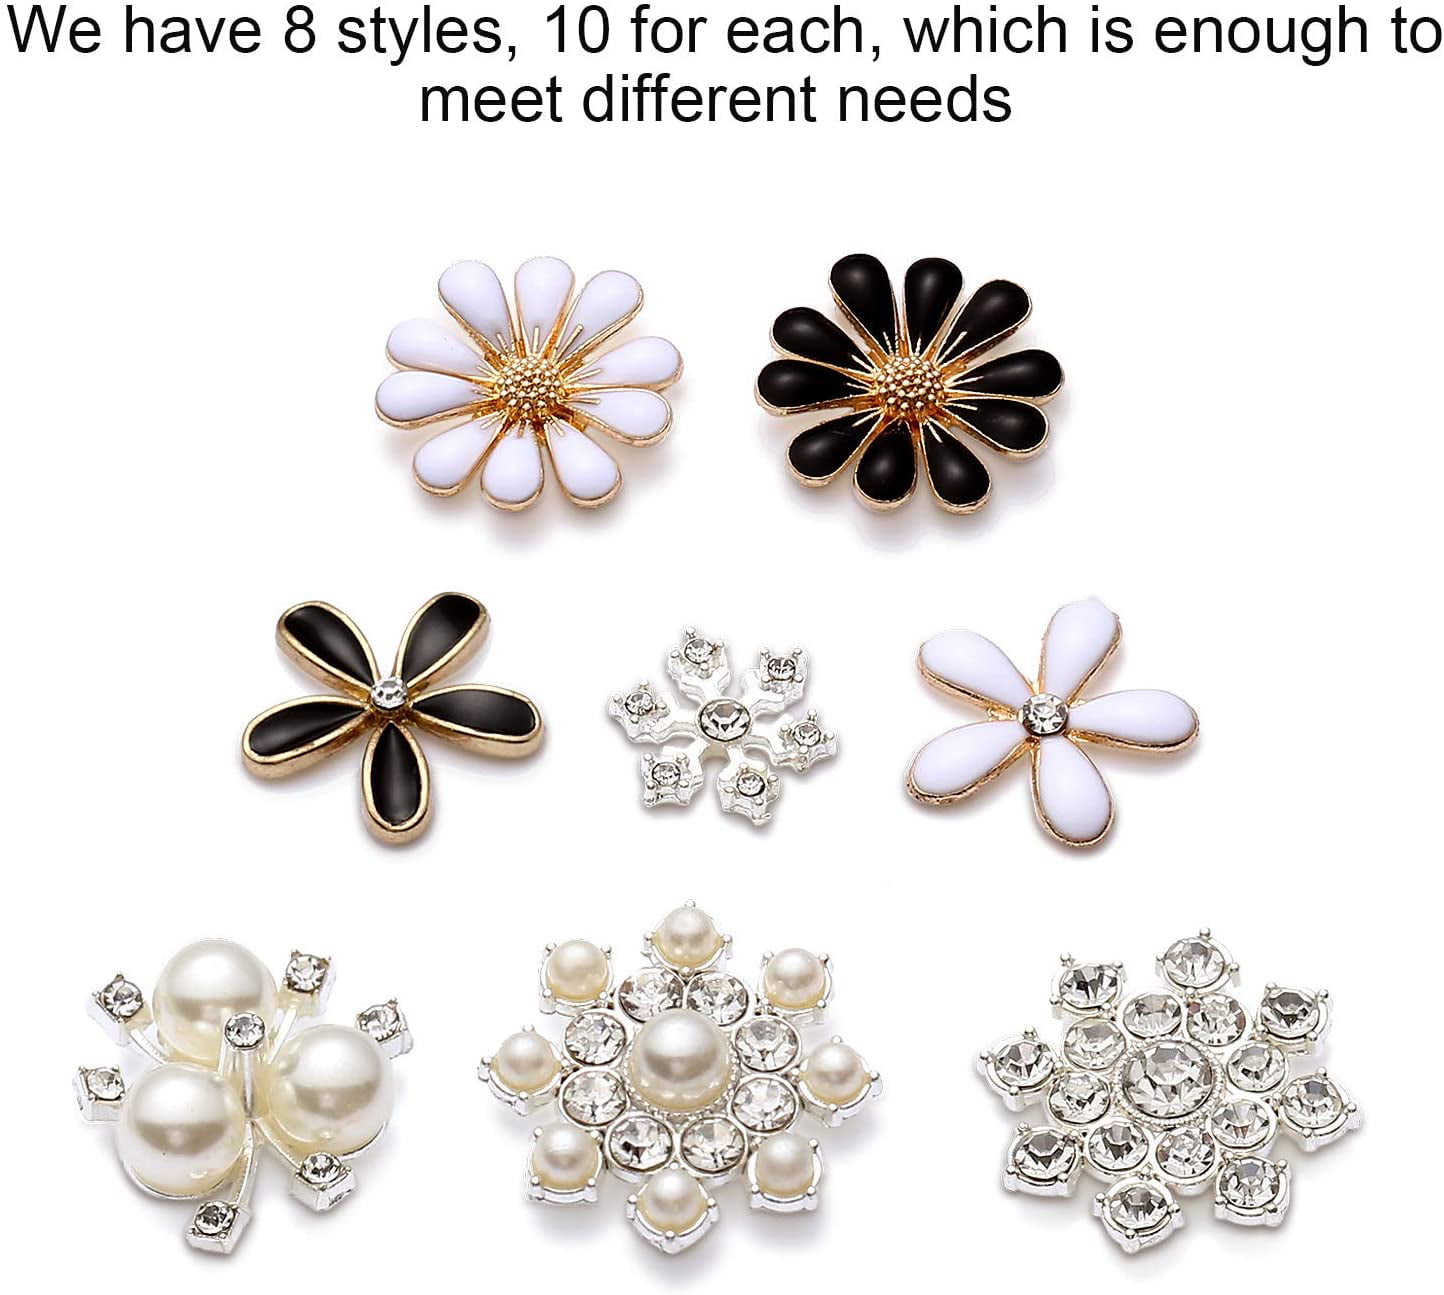 80 Pieces Rhinestone Buttons Embellishments Buttons Faux Pearl Buttons Flat Back Flower Rhinestone Buttons for Jewelry Making Wedding Party Home Decoration DIY Craft Hair Accessory